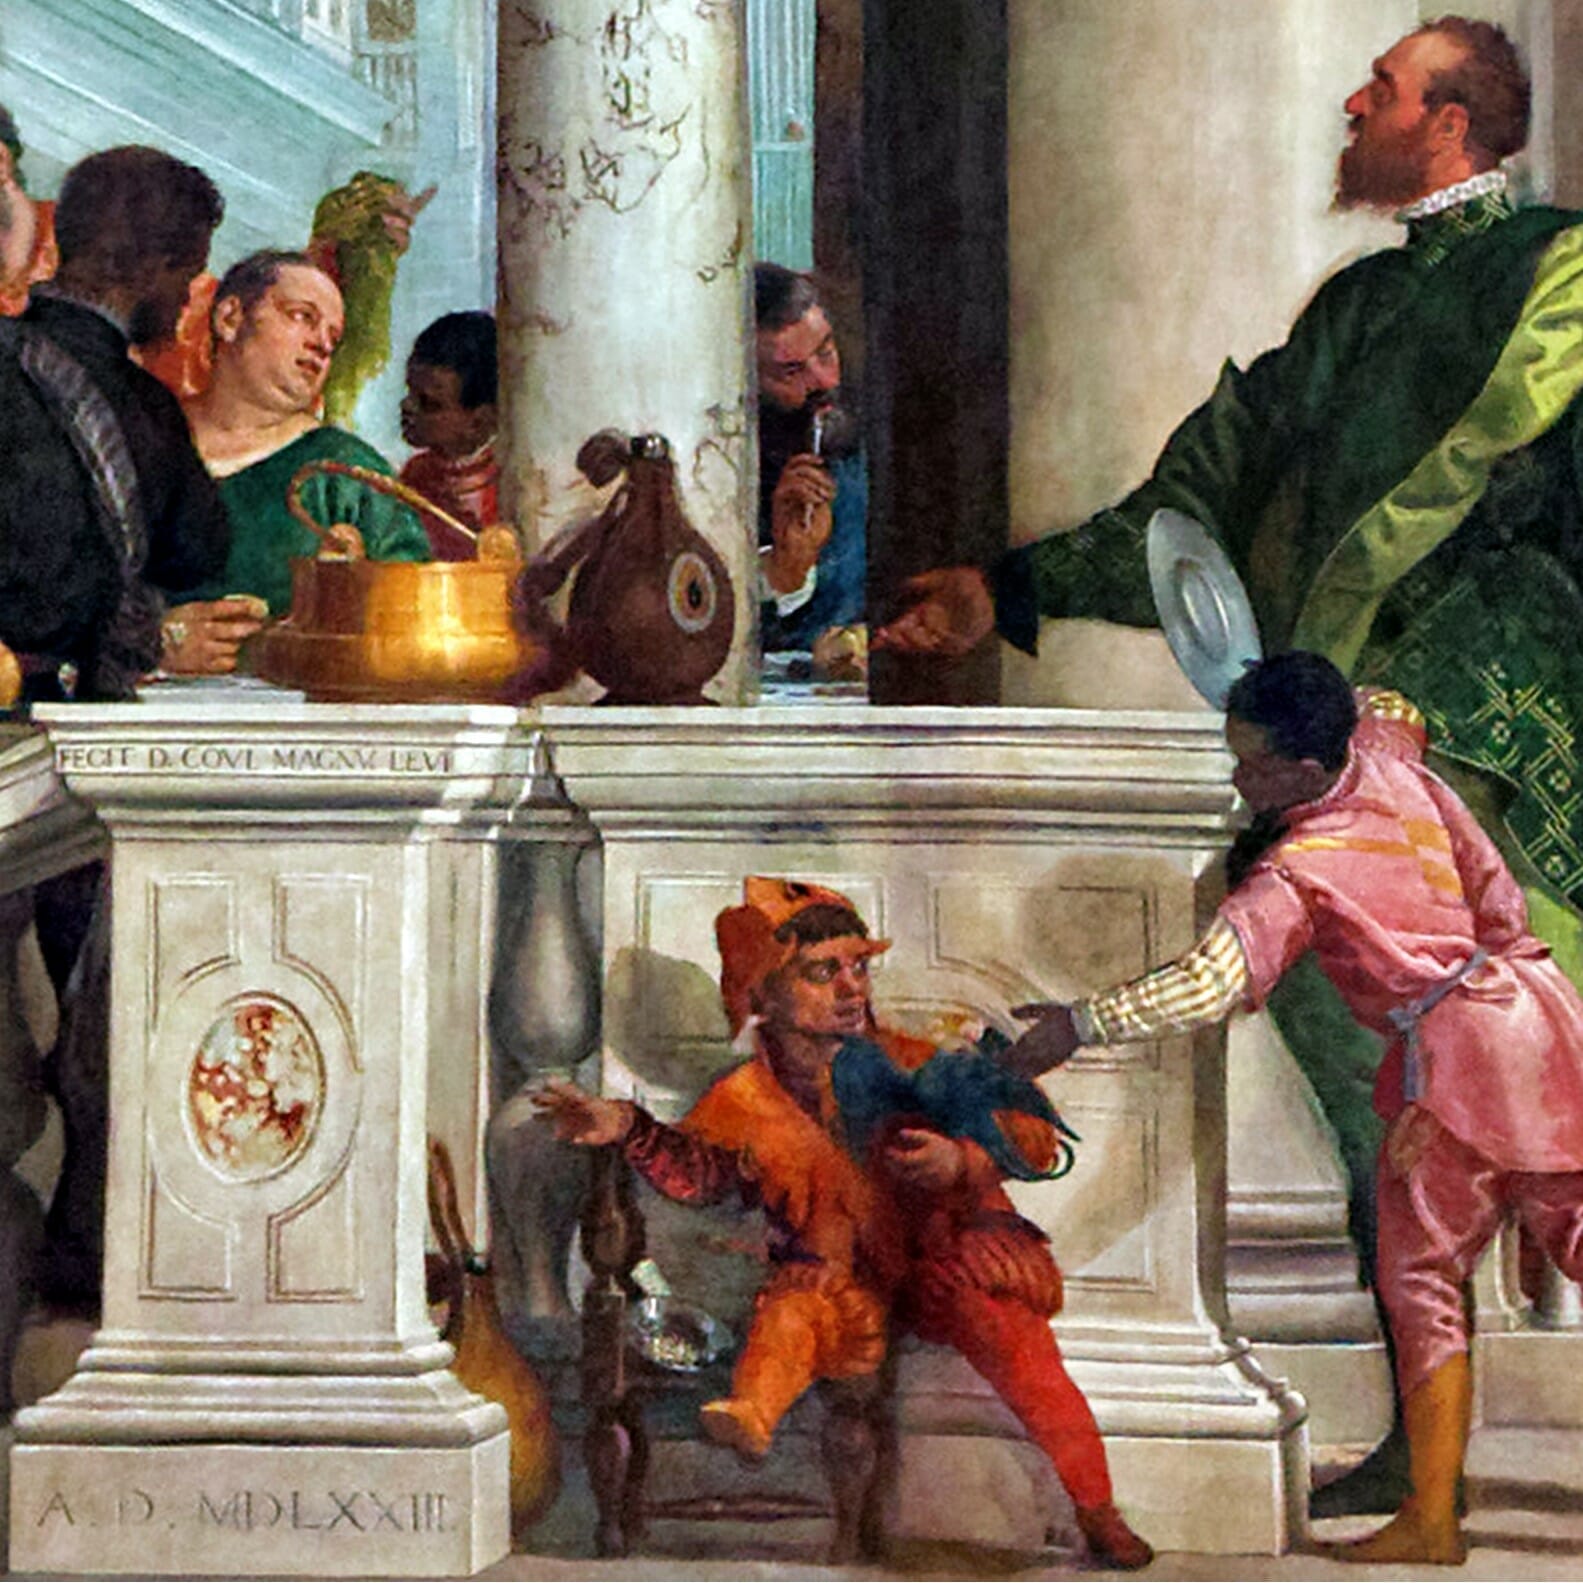 The Feast in the House of Levi - A detail